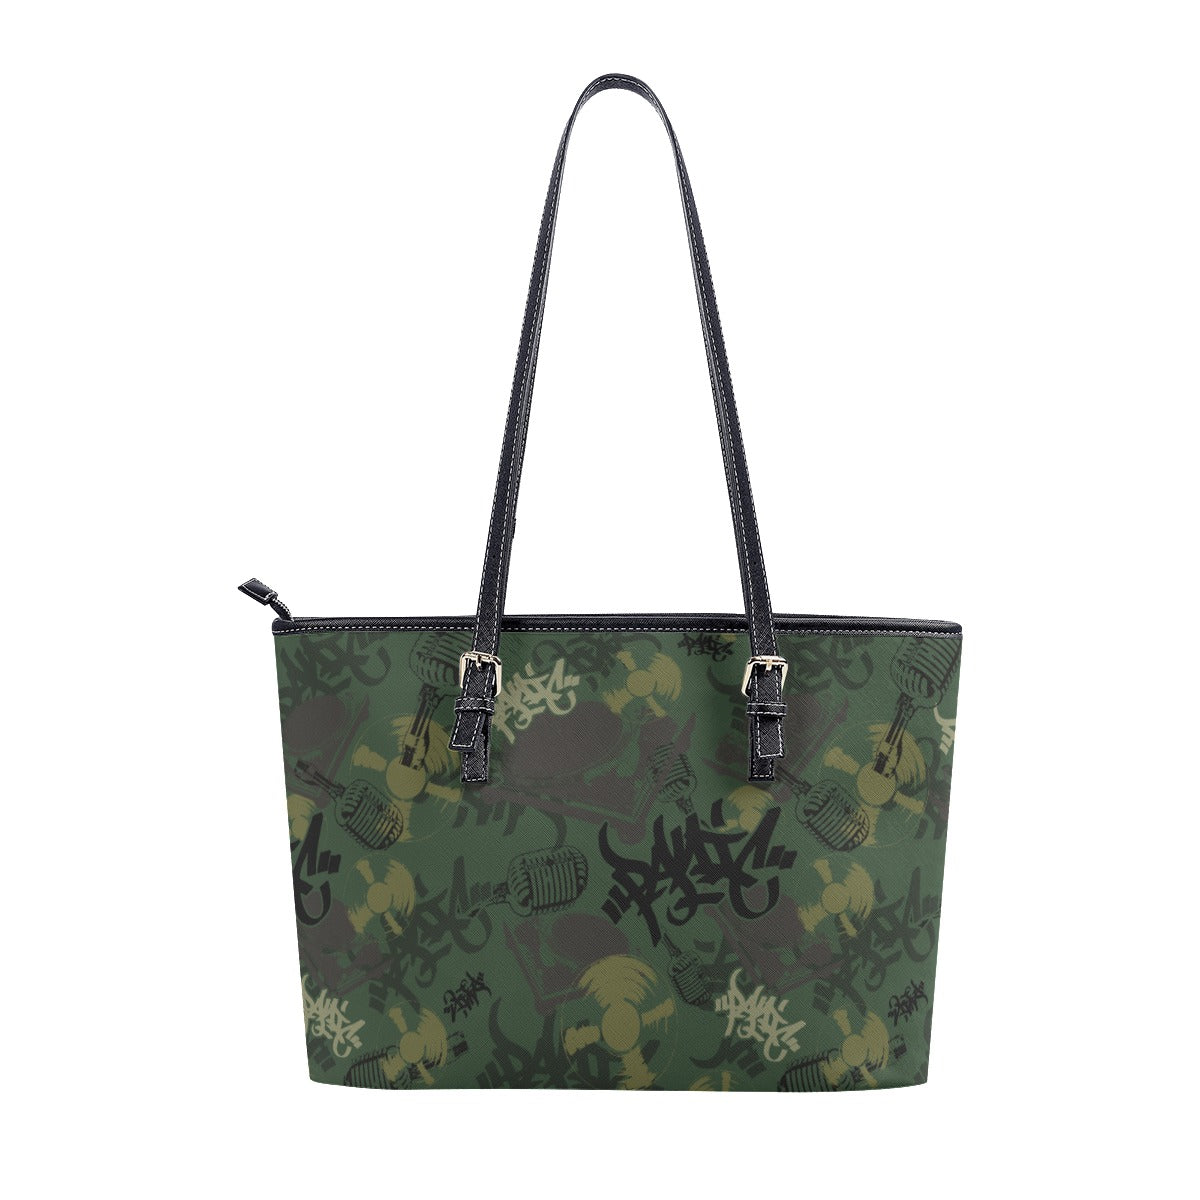 THE ELEMENTS GREEN CAMO FAUX LEATHER TOTE BAG - Panic 39